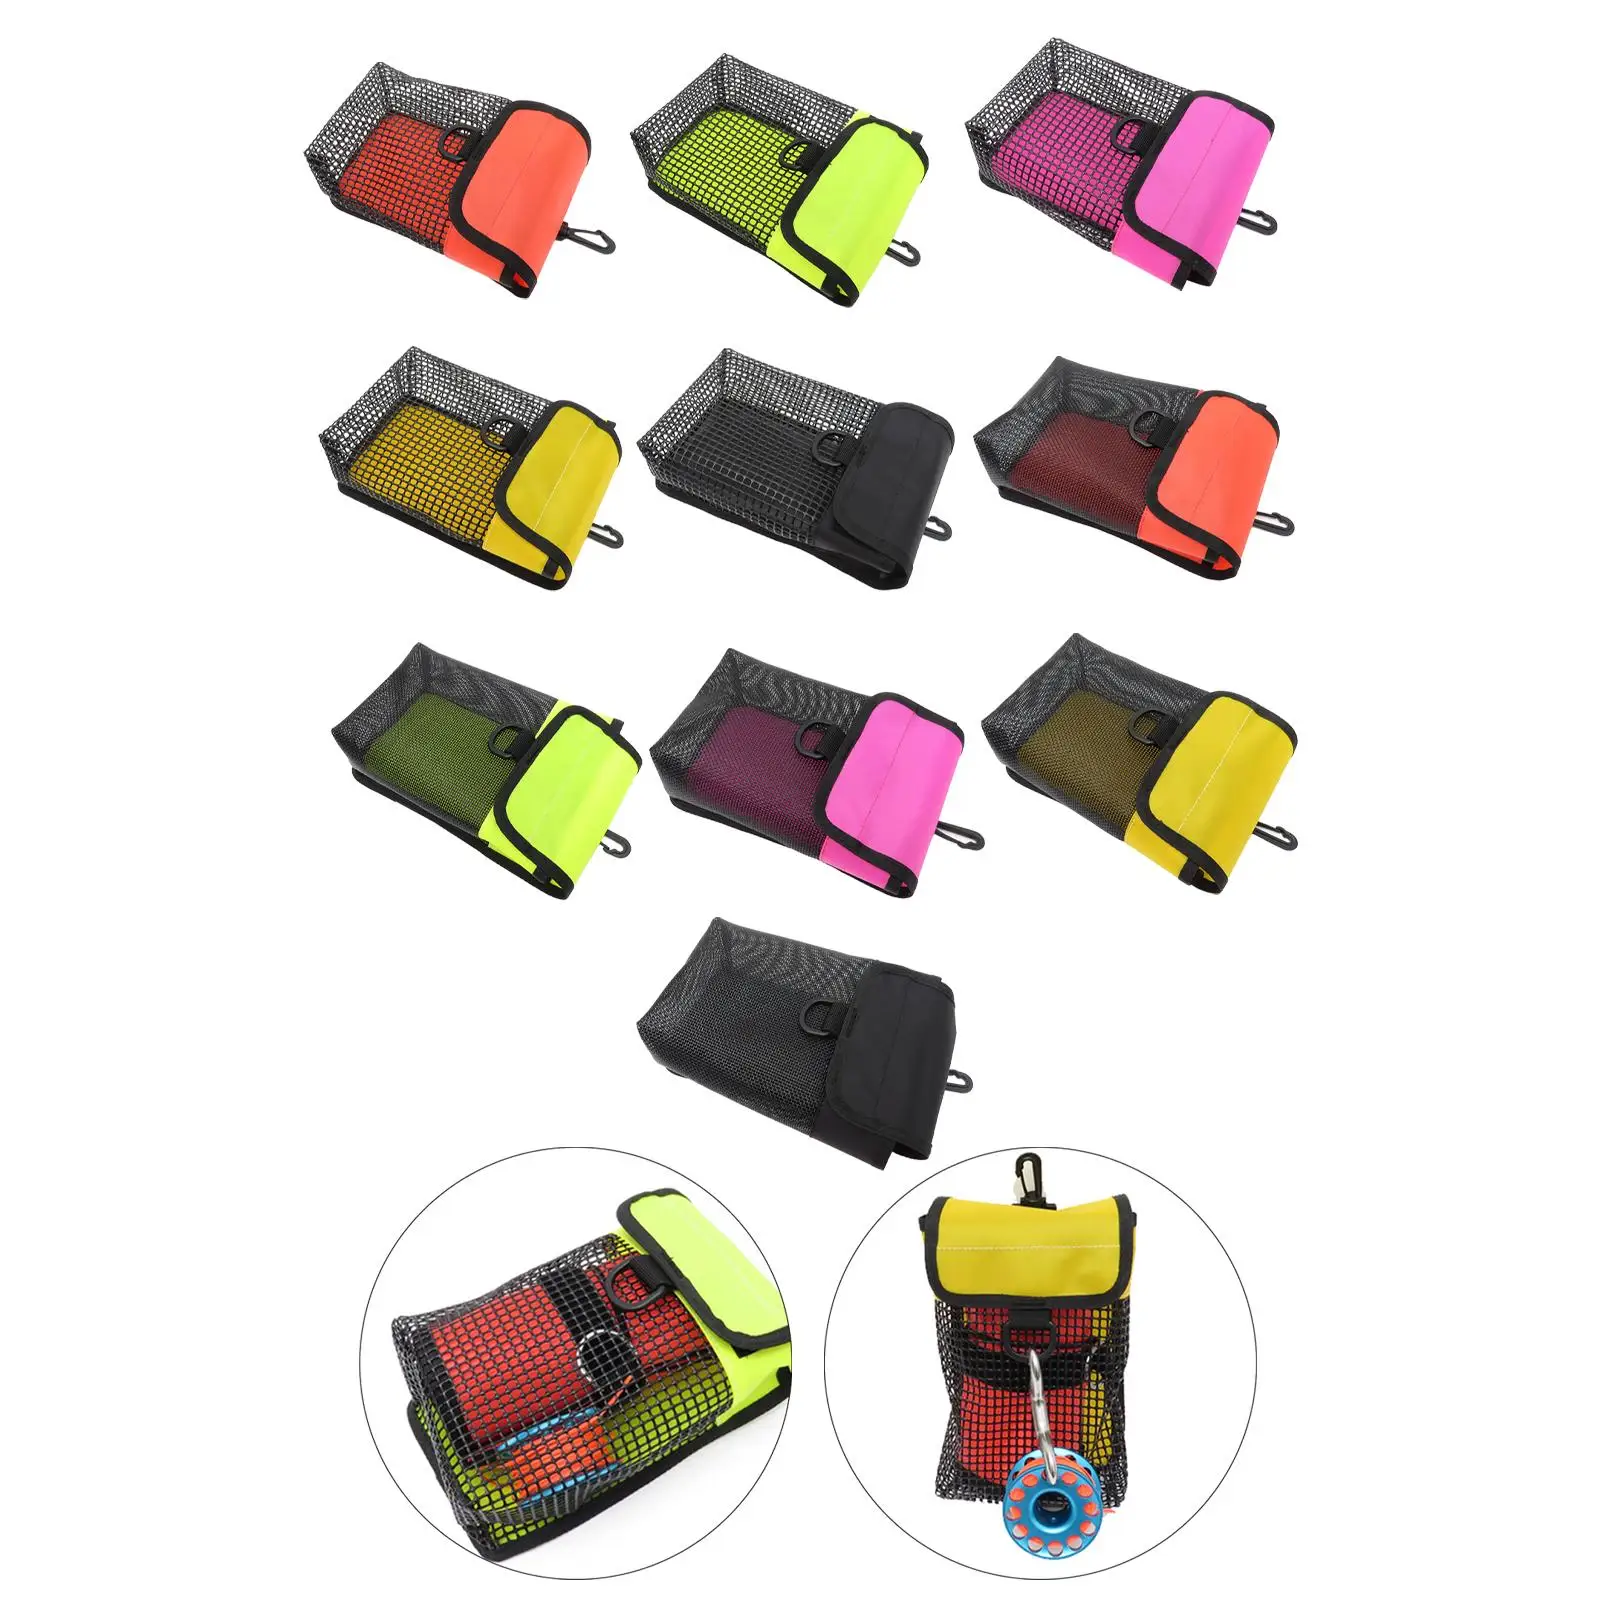 Diving Gear Storage Bag Diving Reel Buoy Carrier Nylon Portable Lightweight with